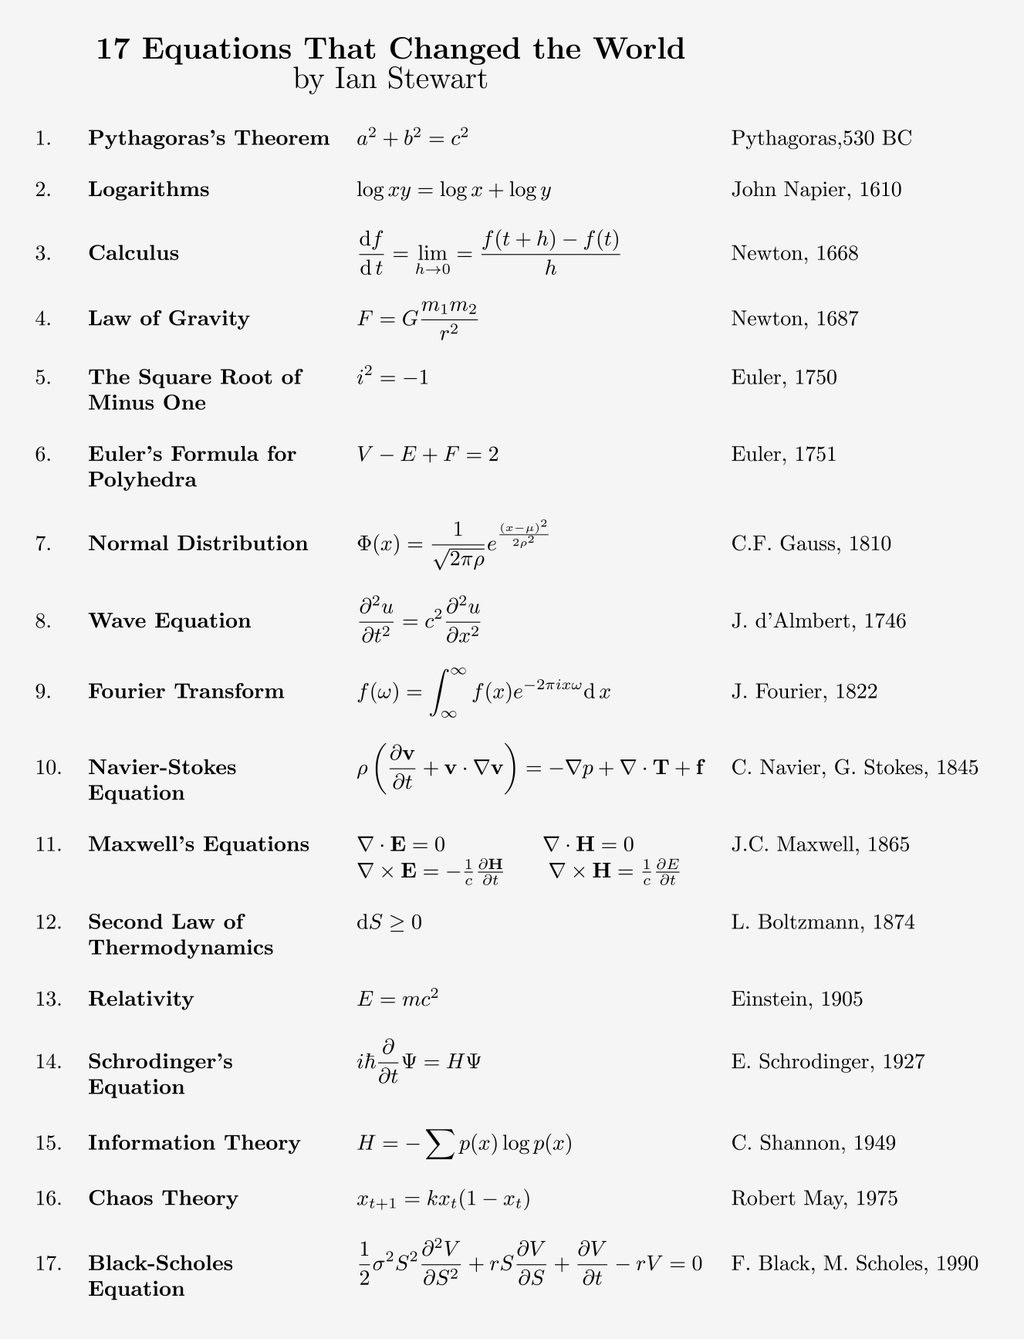 Equations that changed the world